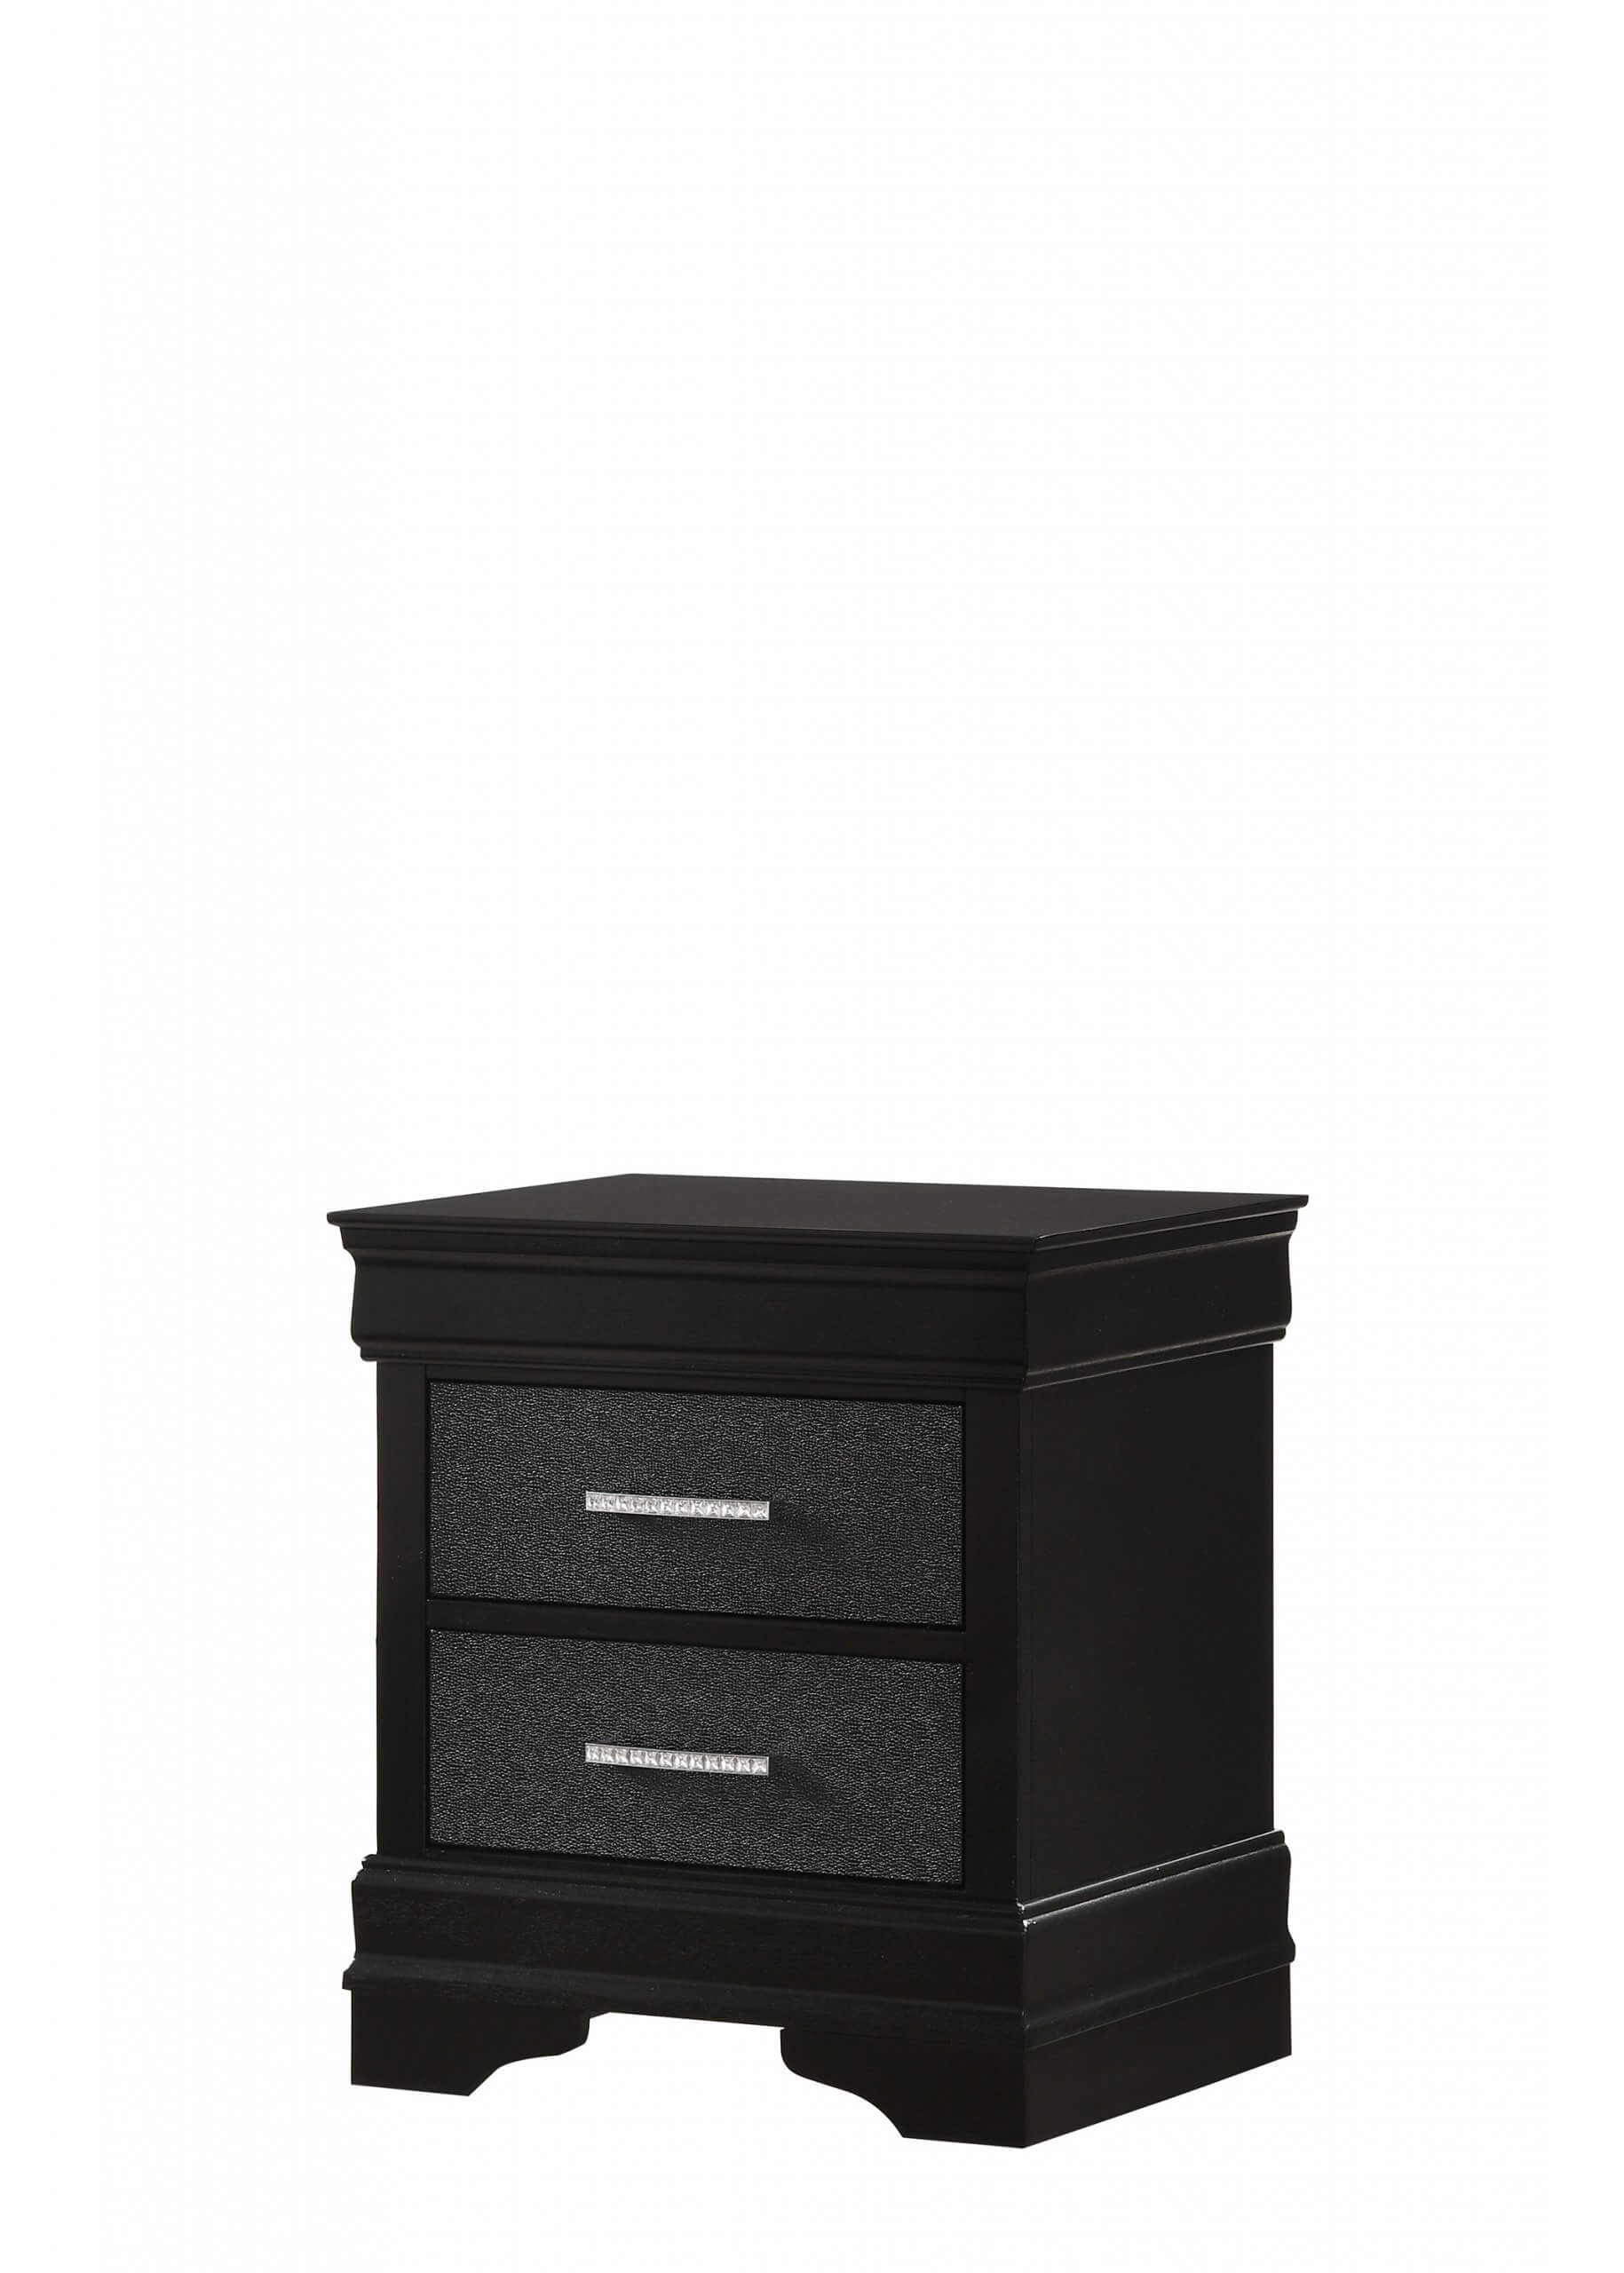 Transitional 4pc Two-Tone Textured Black Finish Crushed Velvet Fabric Twin Size Sleigh Bed Set Dresser Mirror Nightstand - image 3 of 3